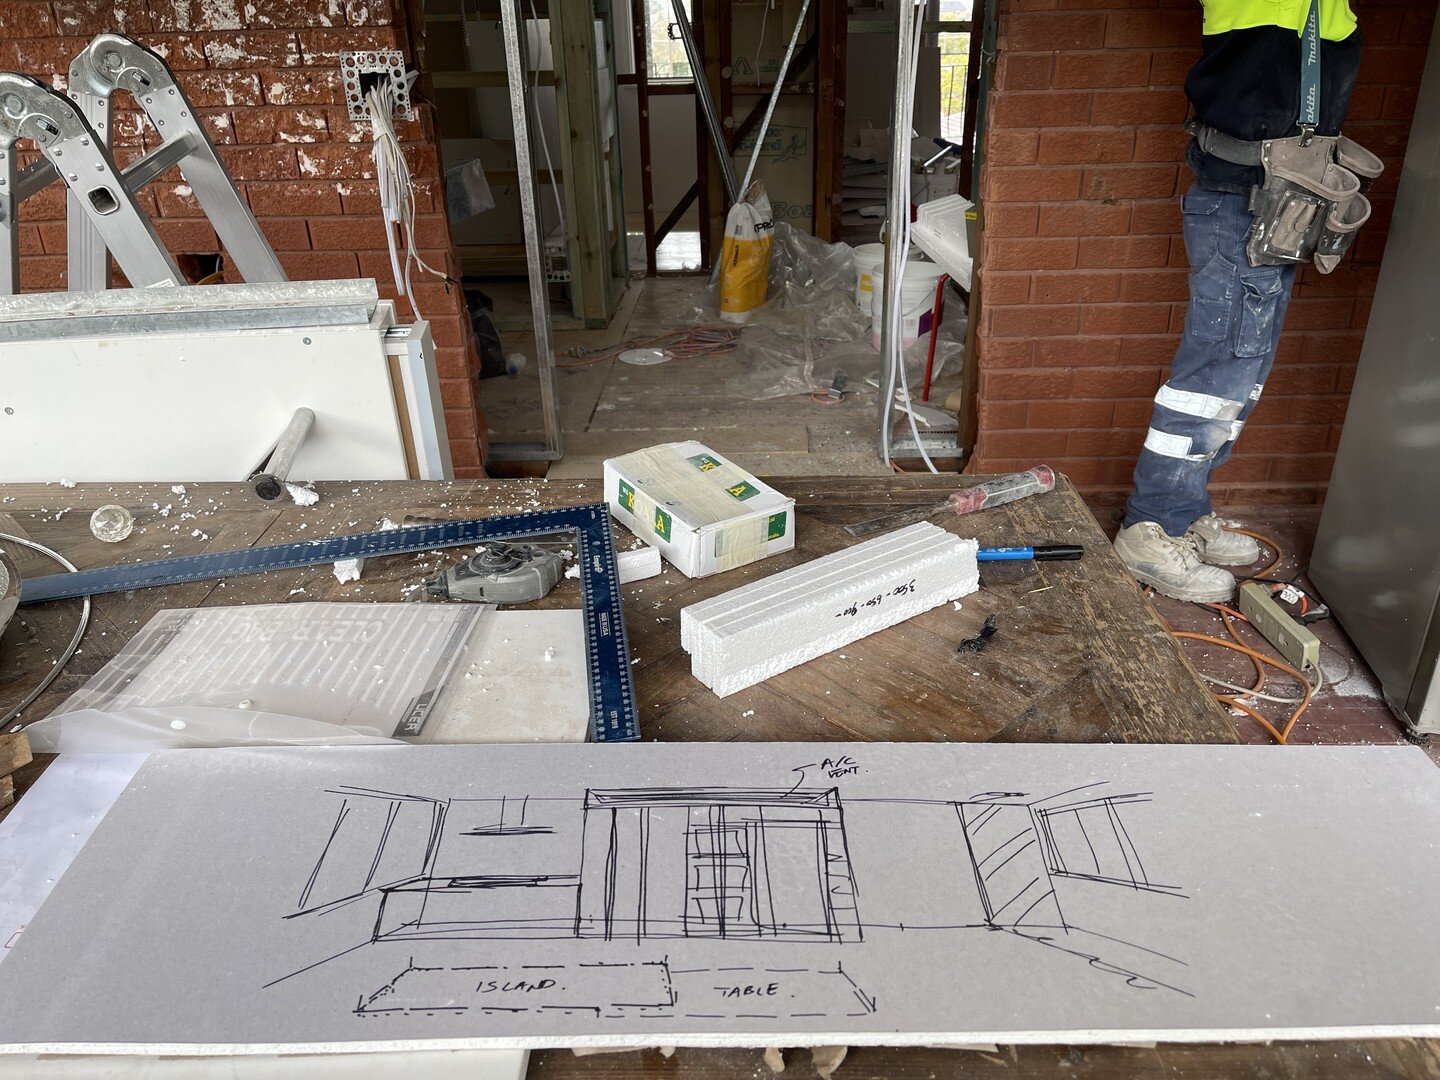 Sometime Drawing on Plasterboard could be the most efficient way to communicate on site.